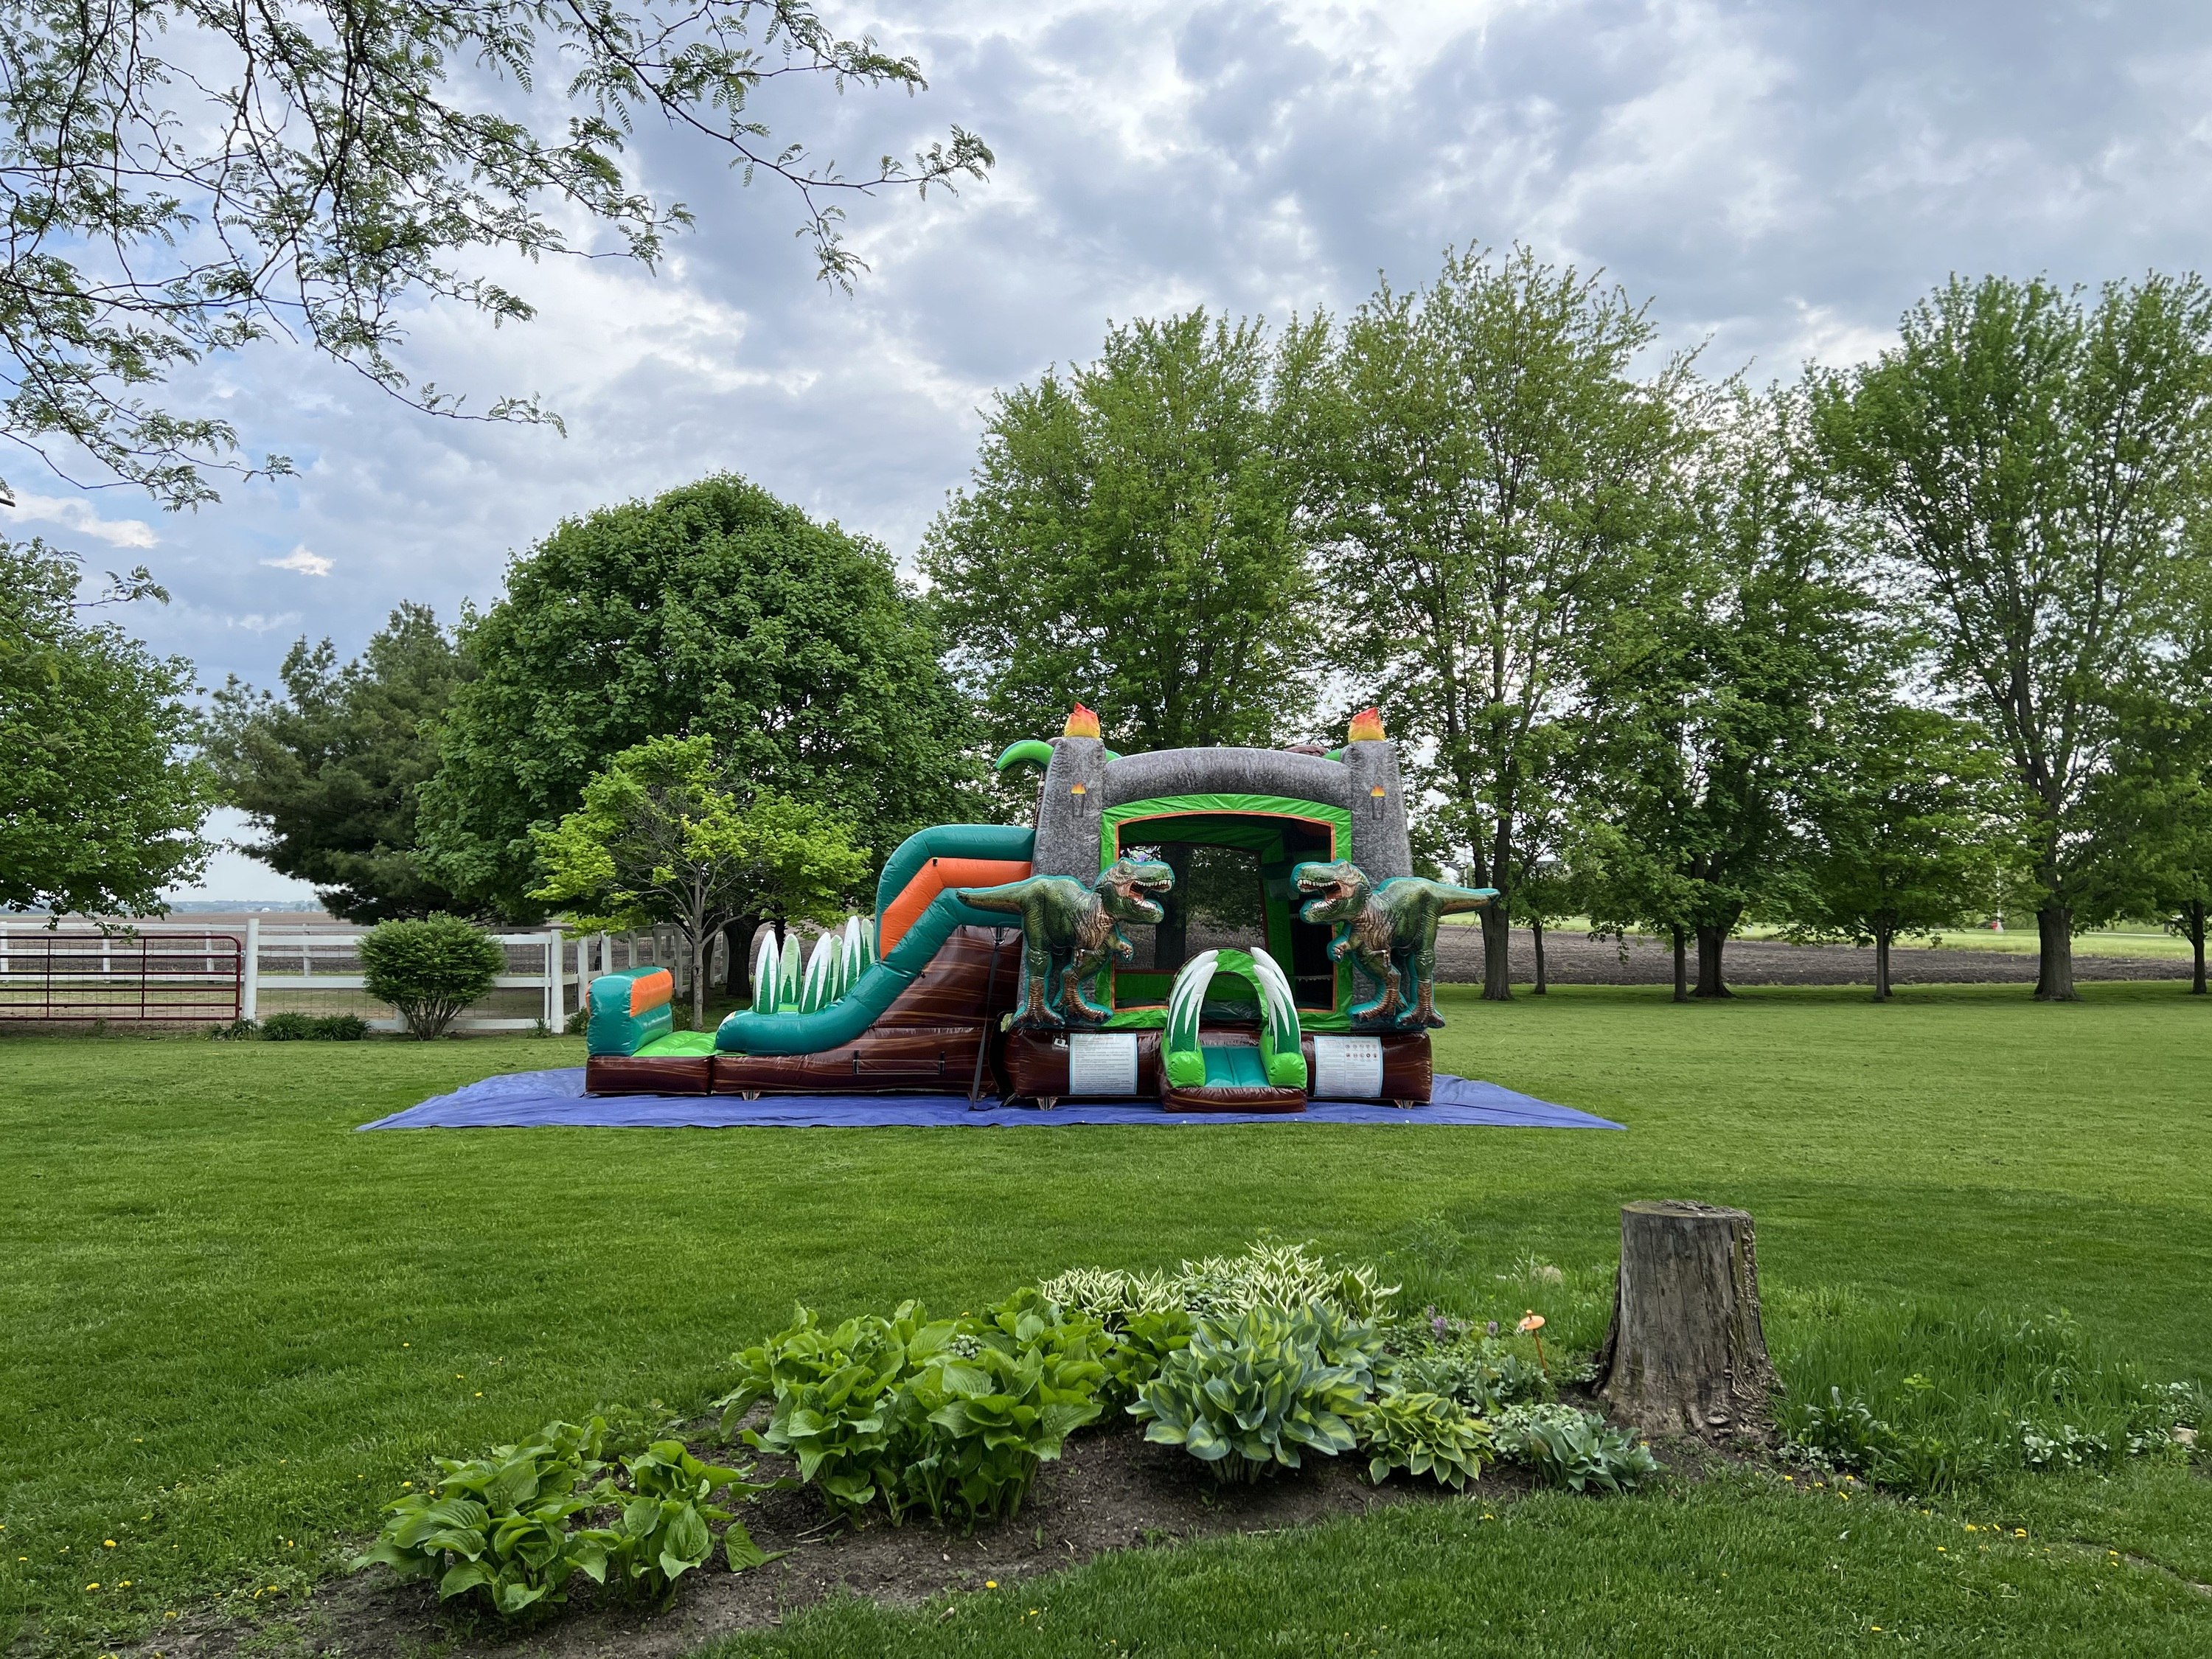 combo bounce house rentals by Fun Bounces Rental in Shorewood IL 60404